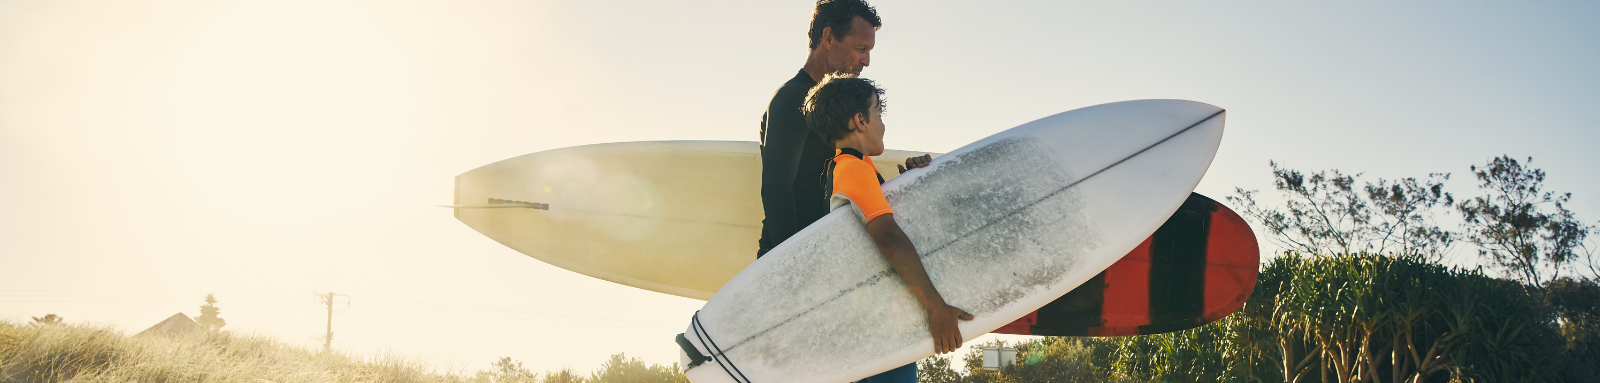 Father and son surfing